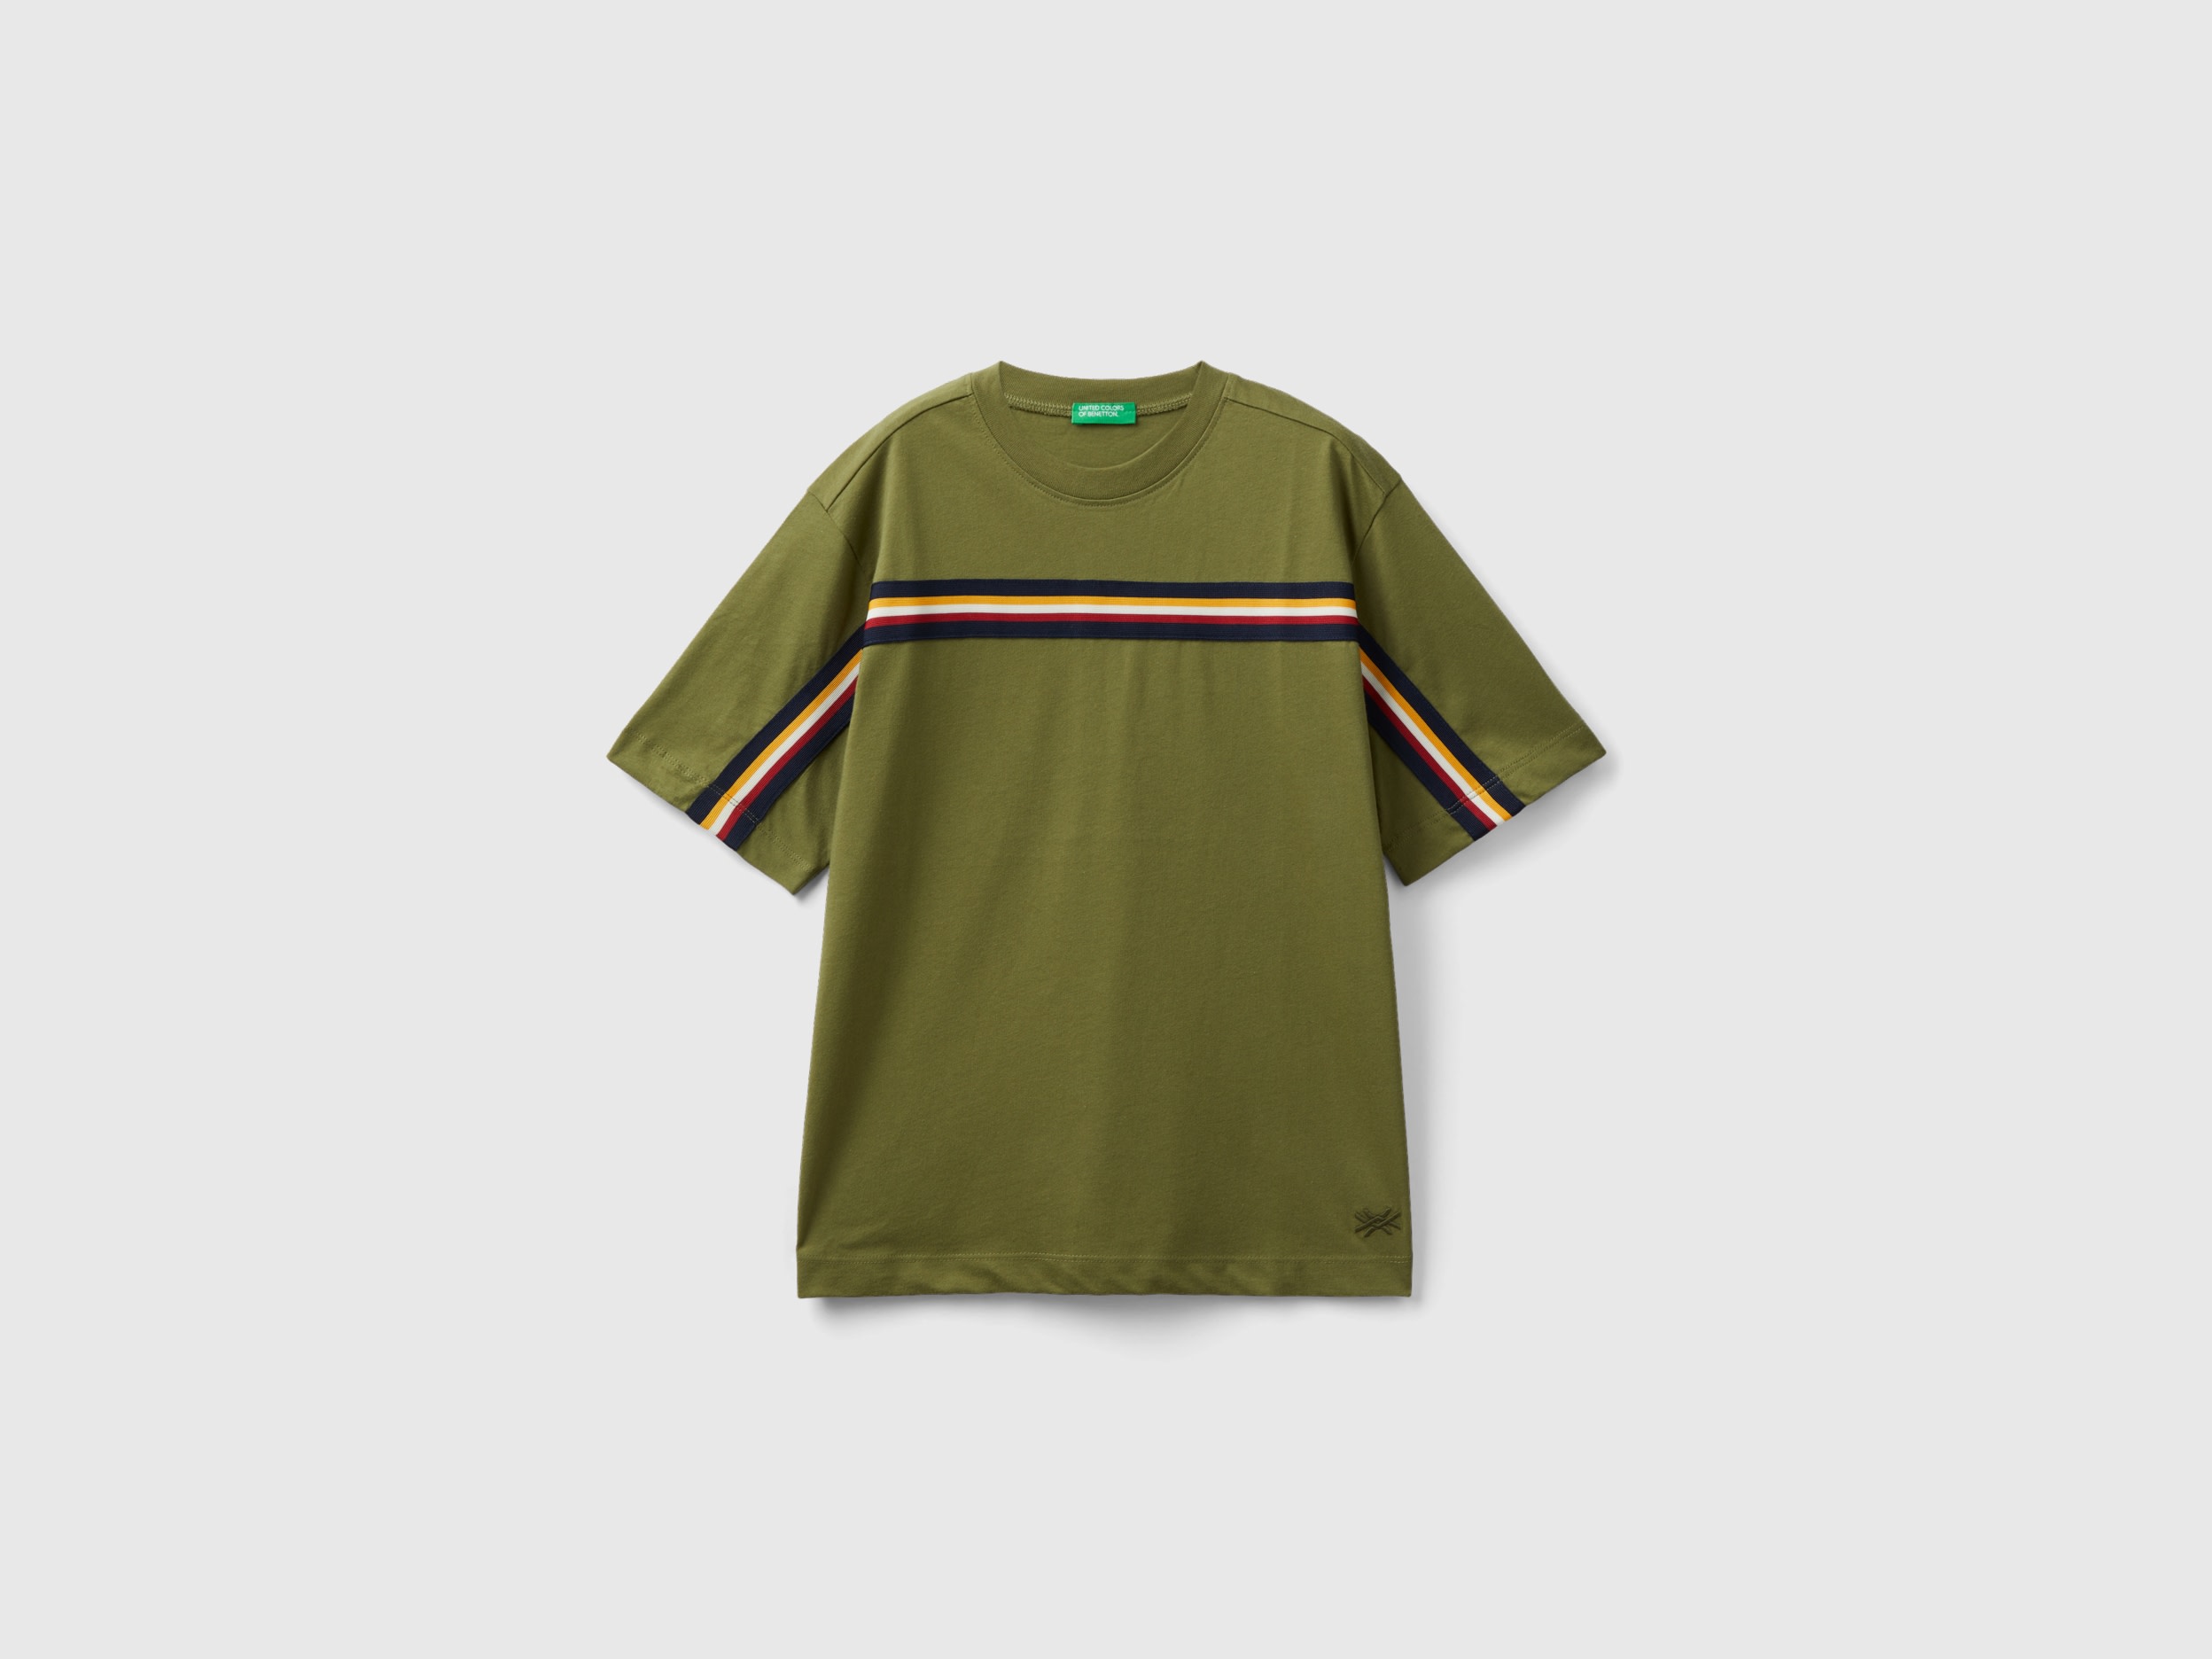 Benetton, T-shirt With Stripe Details, size 3XL, Military Green, Kids